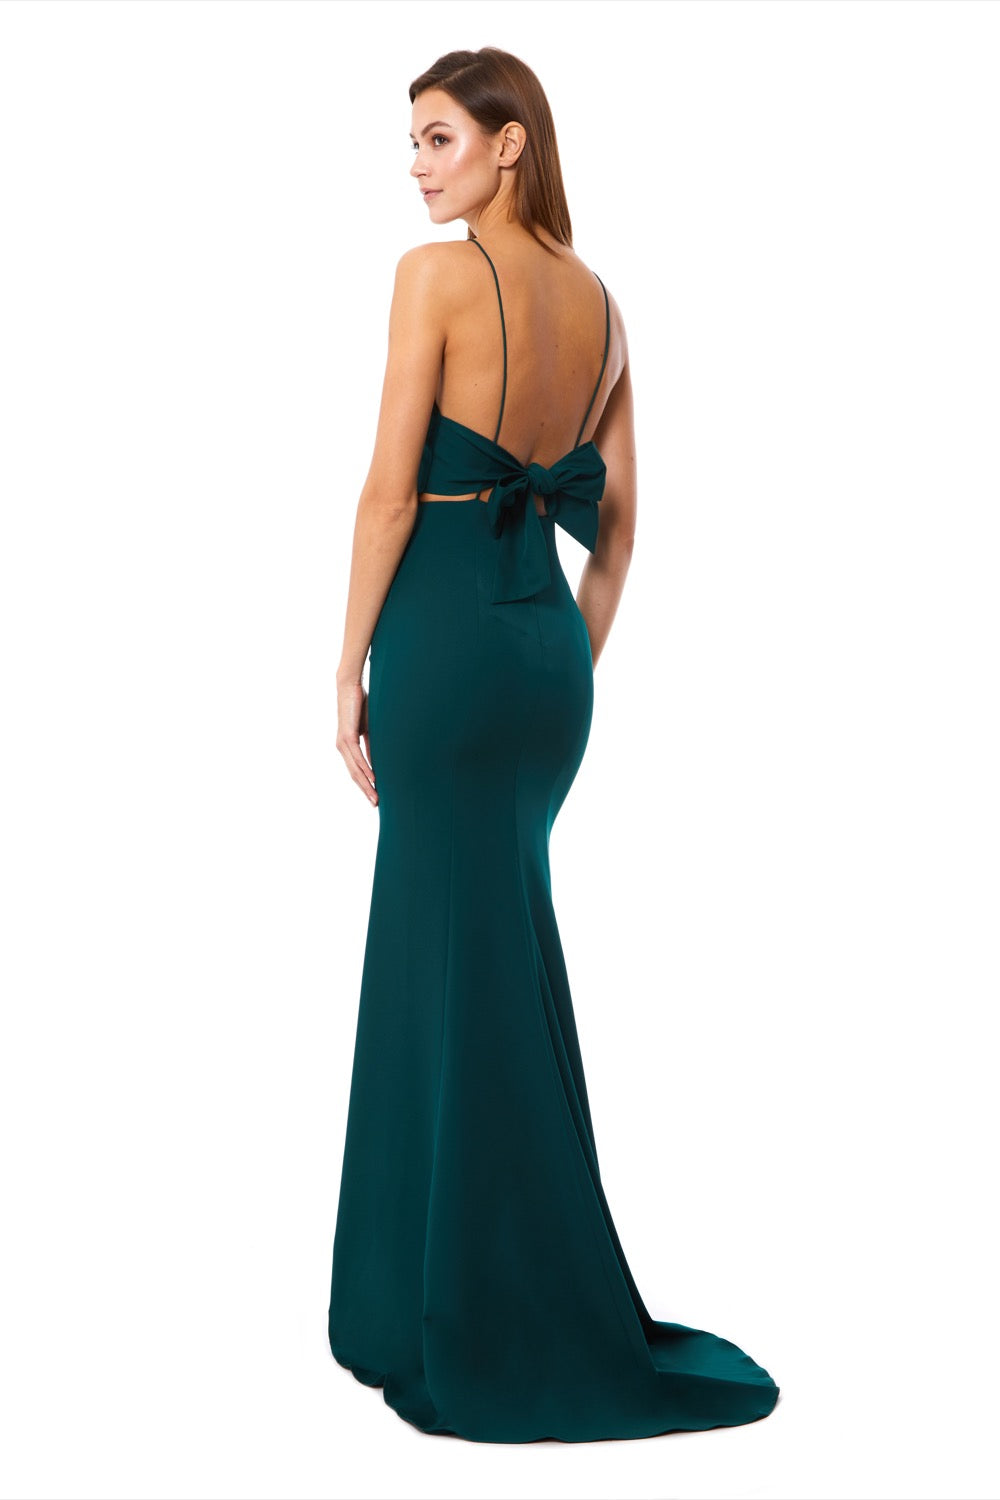 Jemima Square Neck Maxi Dress with Open Back, UK 6 / US 2 / EU 34 / Forest Green